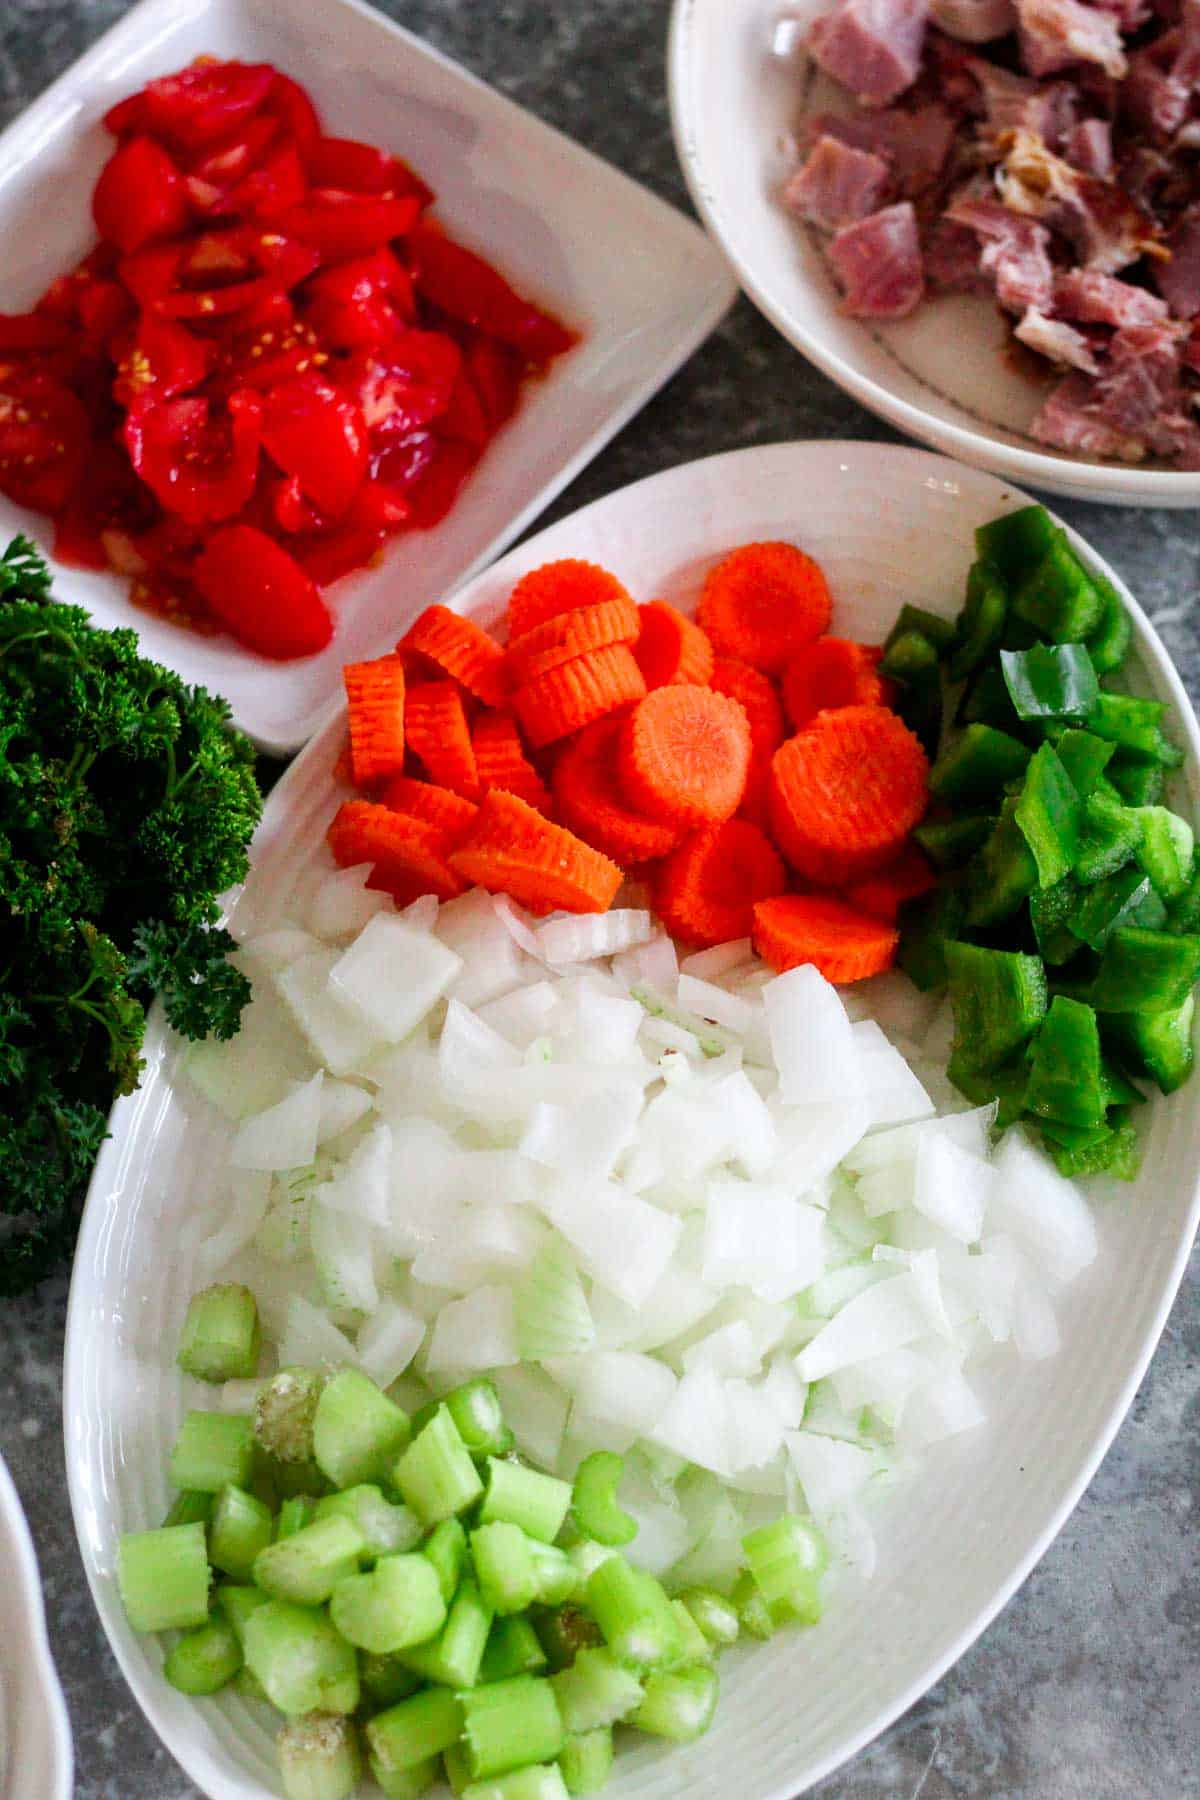 Chopped vegetables for soup: celery, onions, green pepper, carrot, diced tomatoes and parsley are visible.